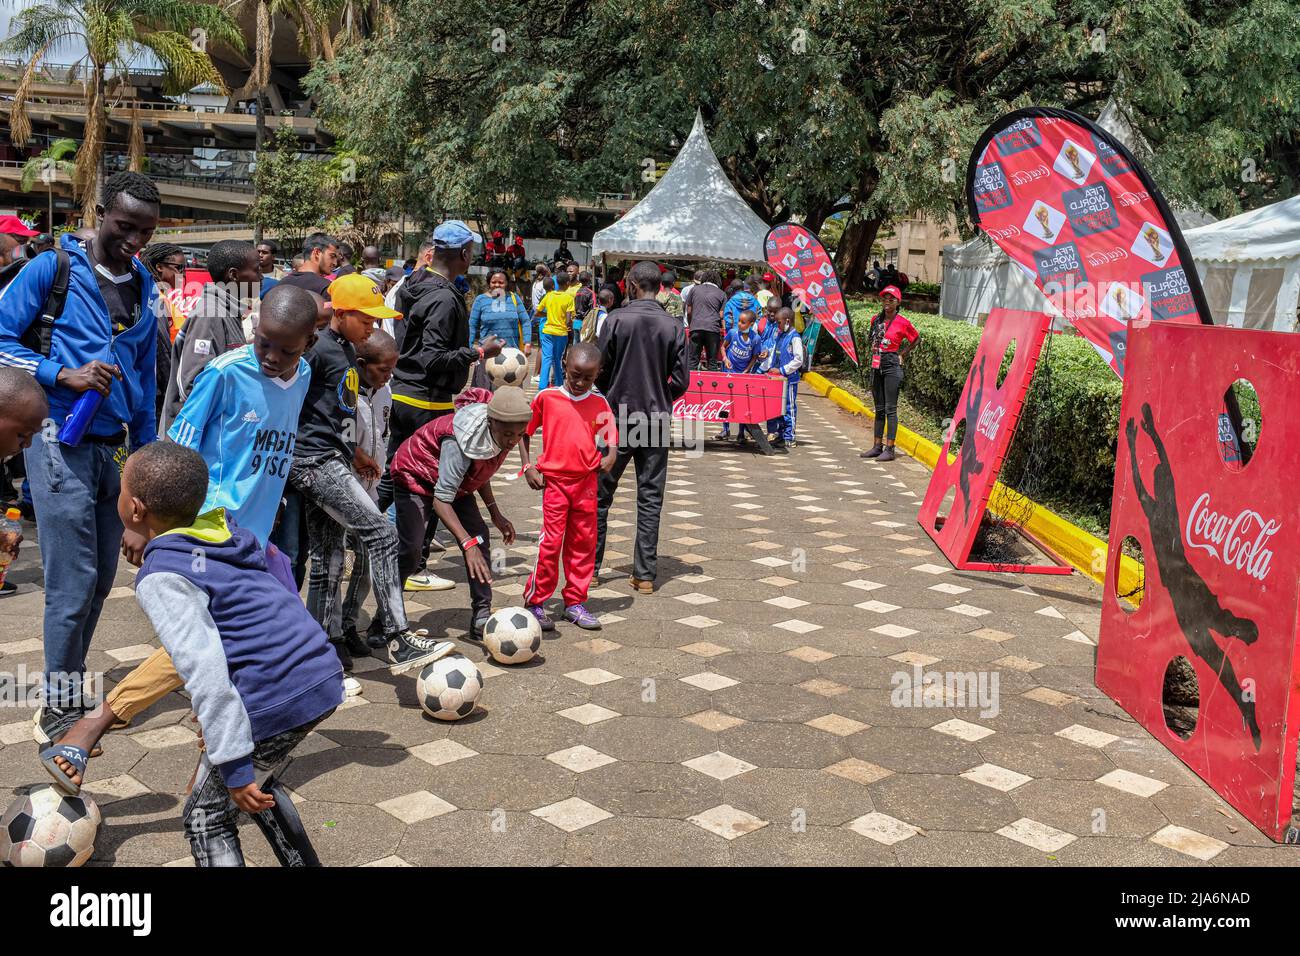 People arrive at the Kenyatta International Convention Centre (K.I.C.C) for a historic moment during the FIFA World Cup tour and public viewing in Nairobi. The FIFA World Cup trophy landed in Kenya for a two-day tour including public viewing ahead of this year's World Cup in Qatar. Stock Photo